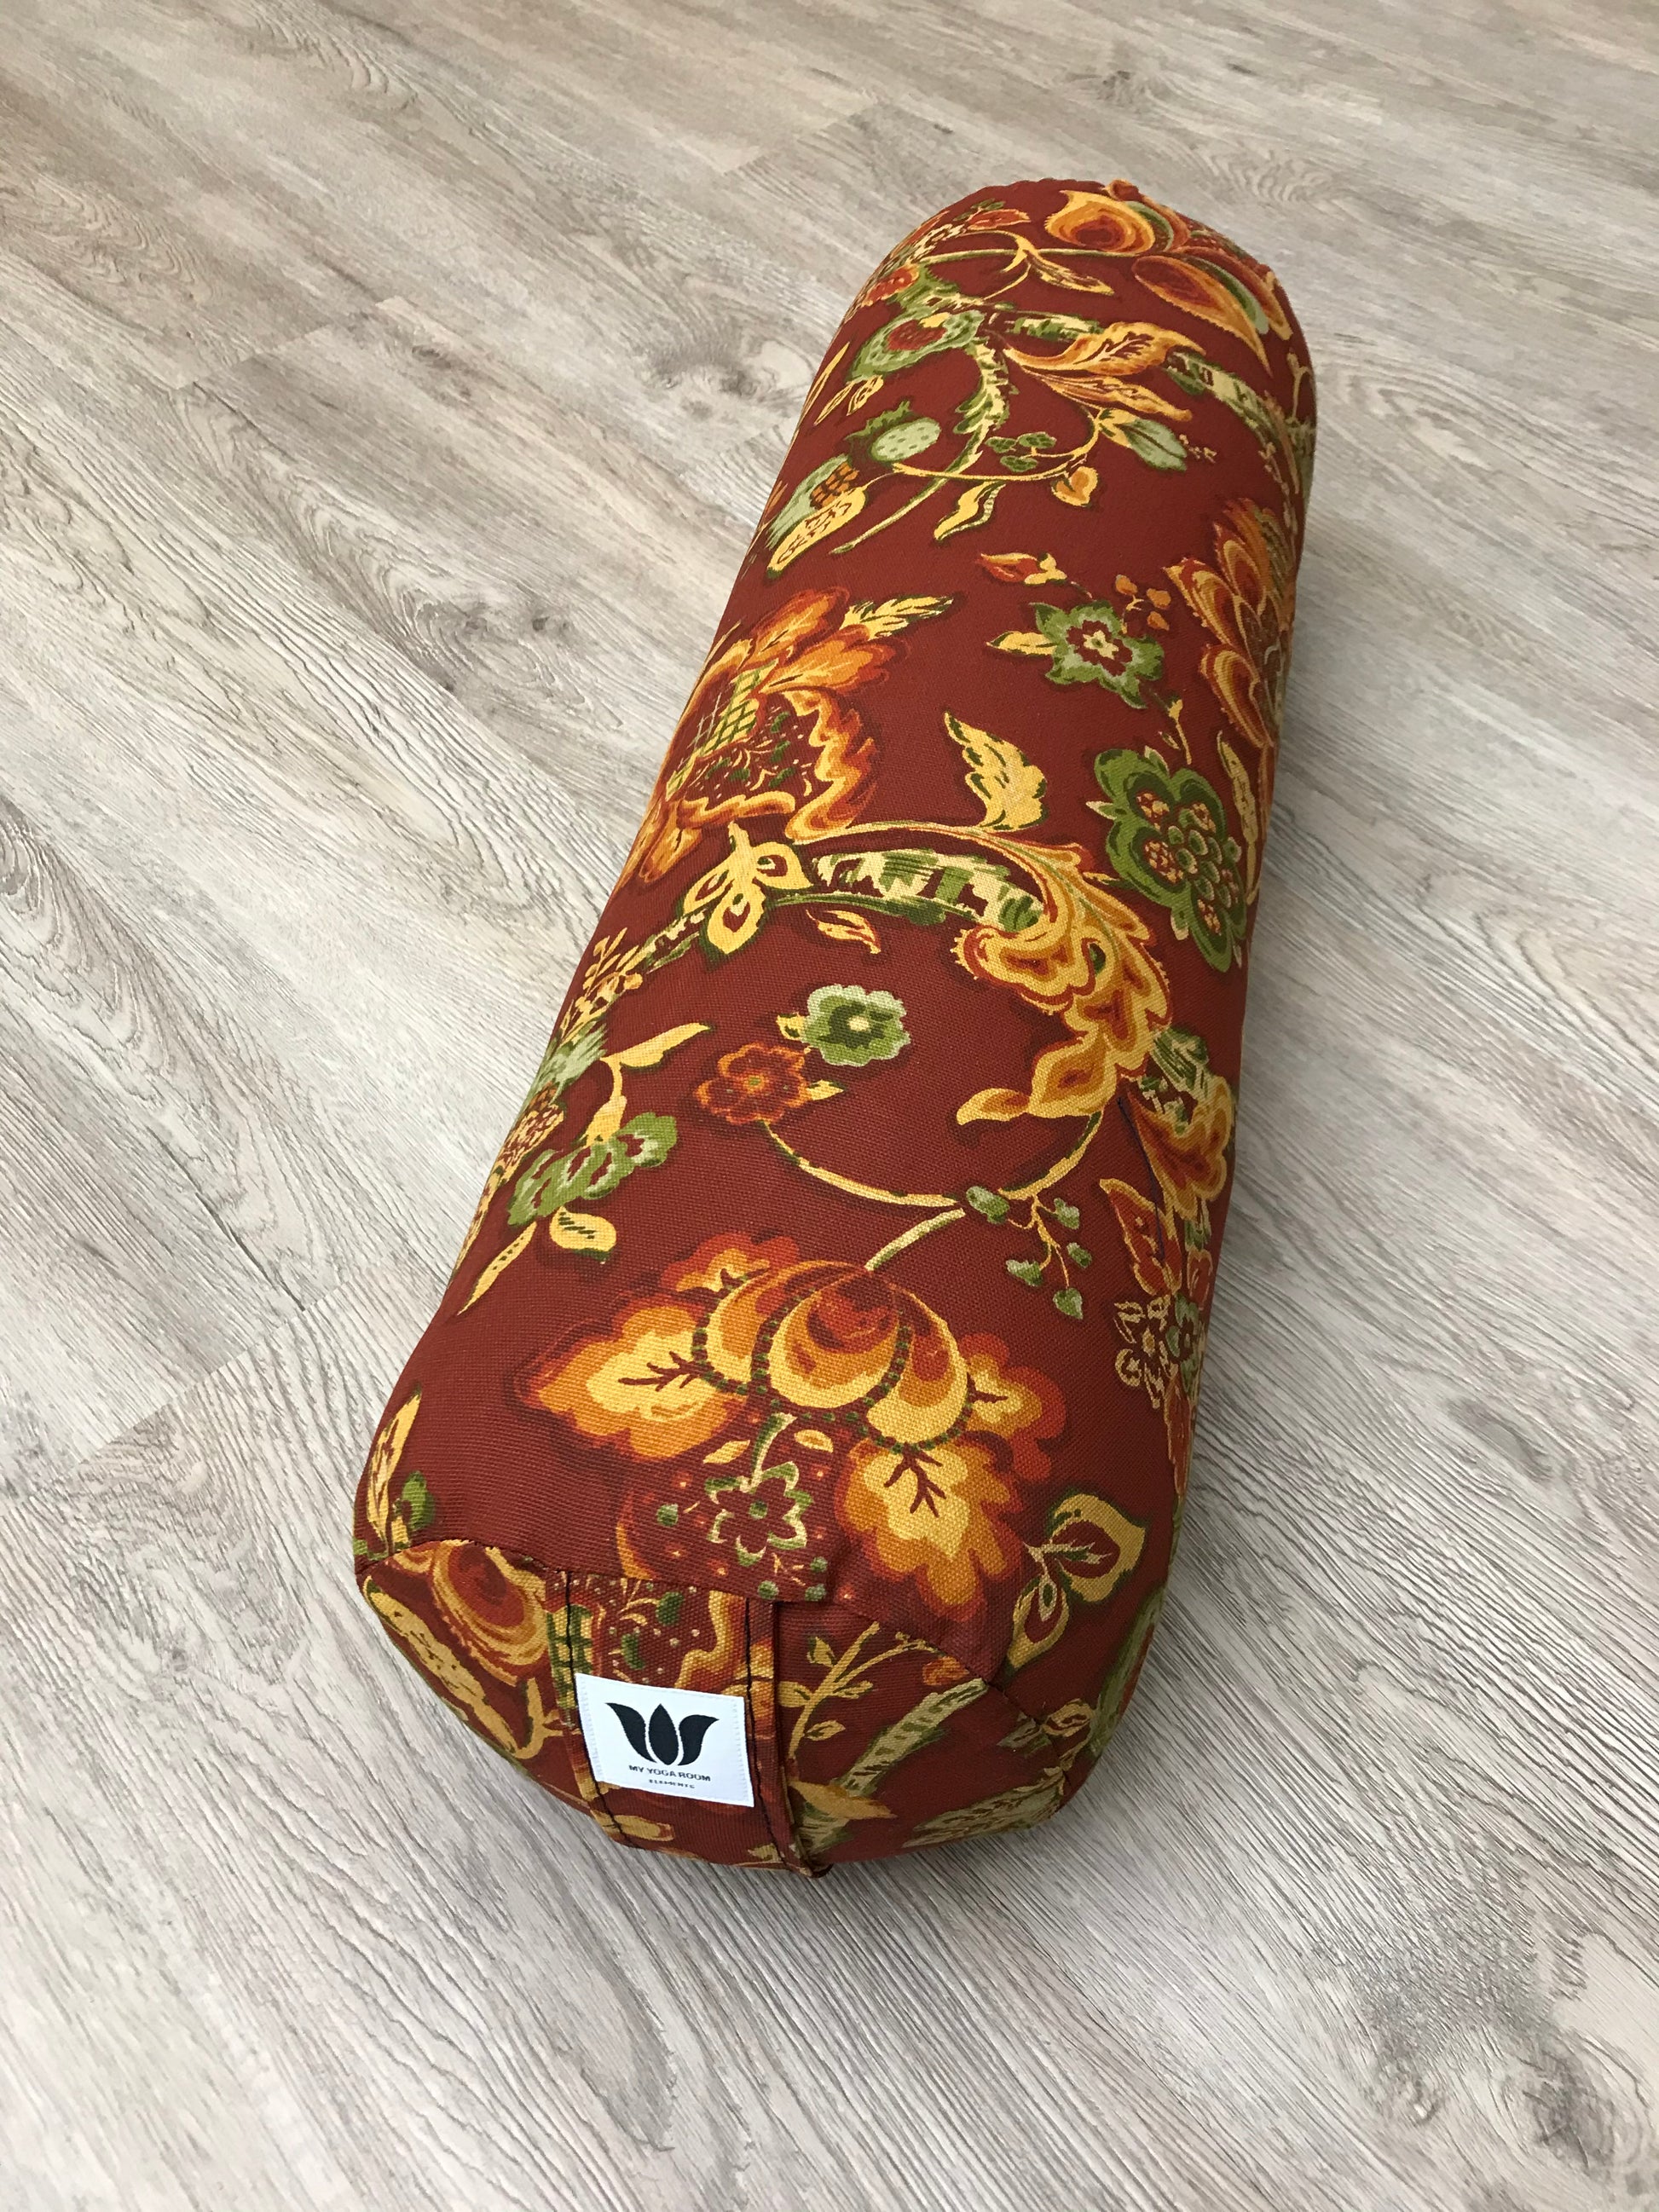 Round yoga bolster in cotton canvas burnt orange floral print fabric. Allergy conscious fill with removeable cover. Made in Canada by My Yoga Room Elements